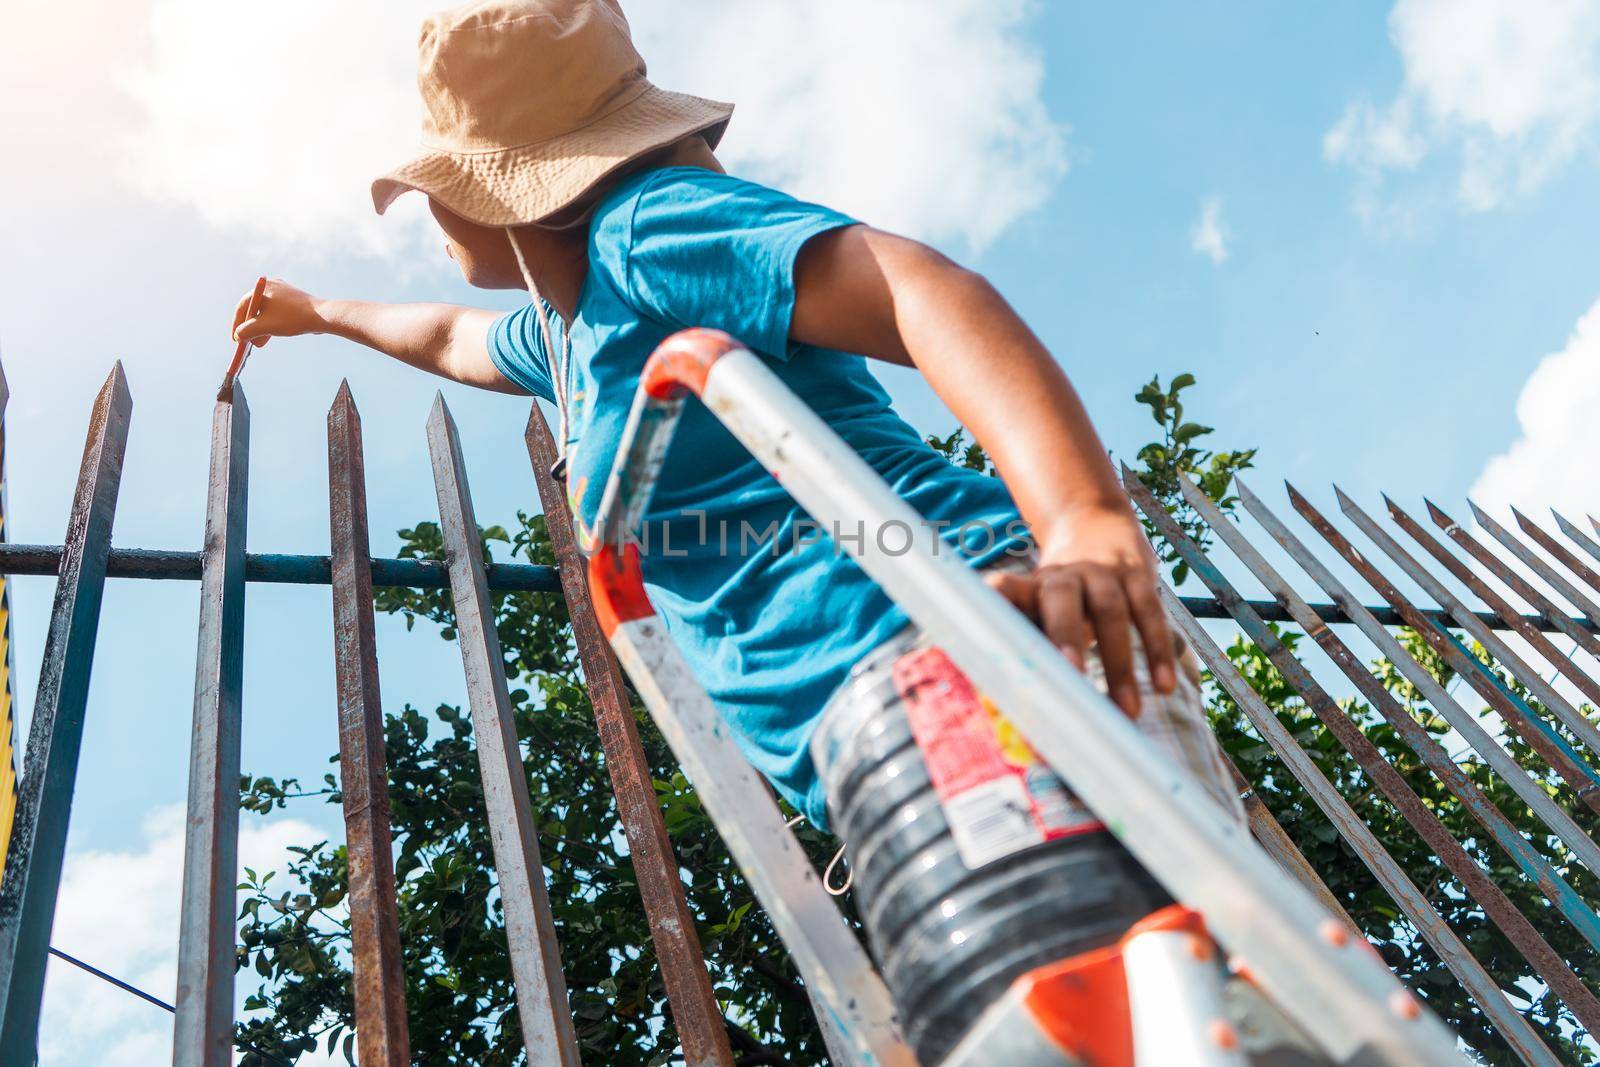 Latin woman dressed in shorts, t-shirt and hat, standing on a ladder standing to paint the highest part of a metal fence outdoors.